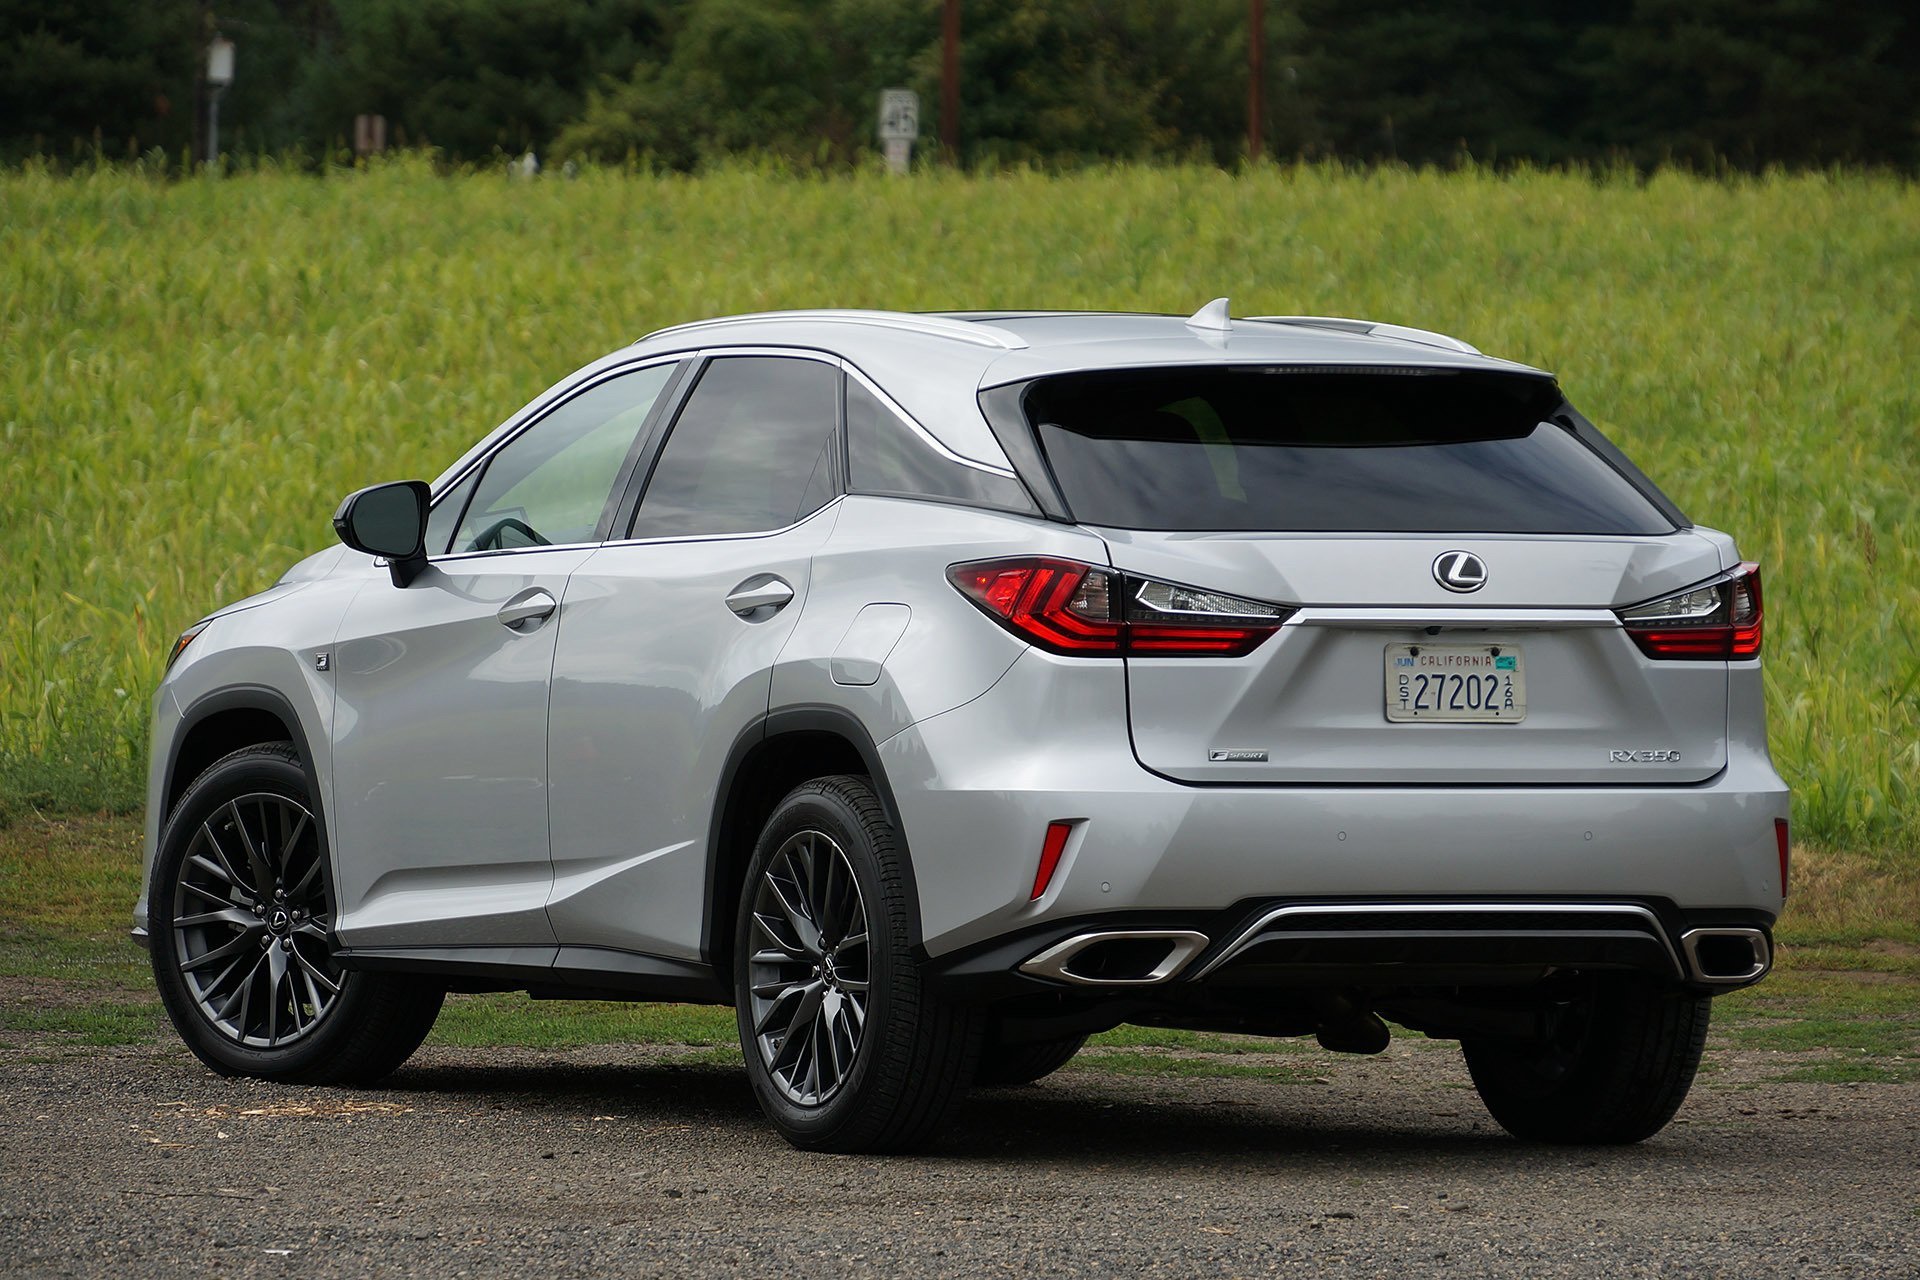 2016 Lexus Rx 350 F Sport Suv Cars Wallpapers Hd Desktop And Mobile Backgrounds